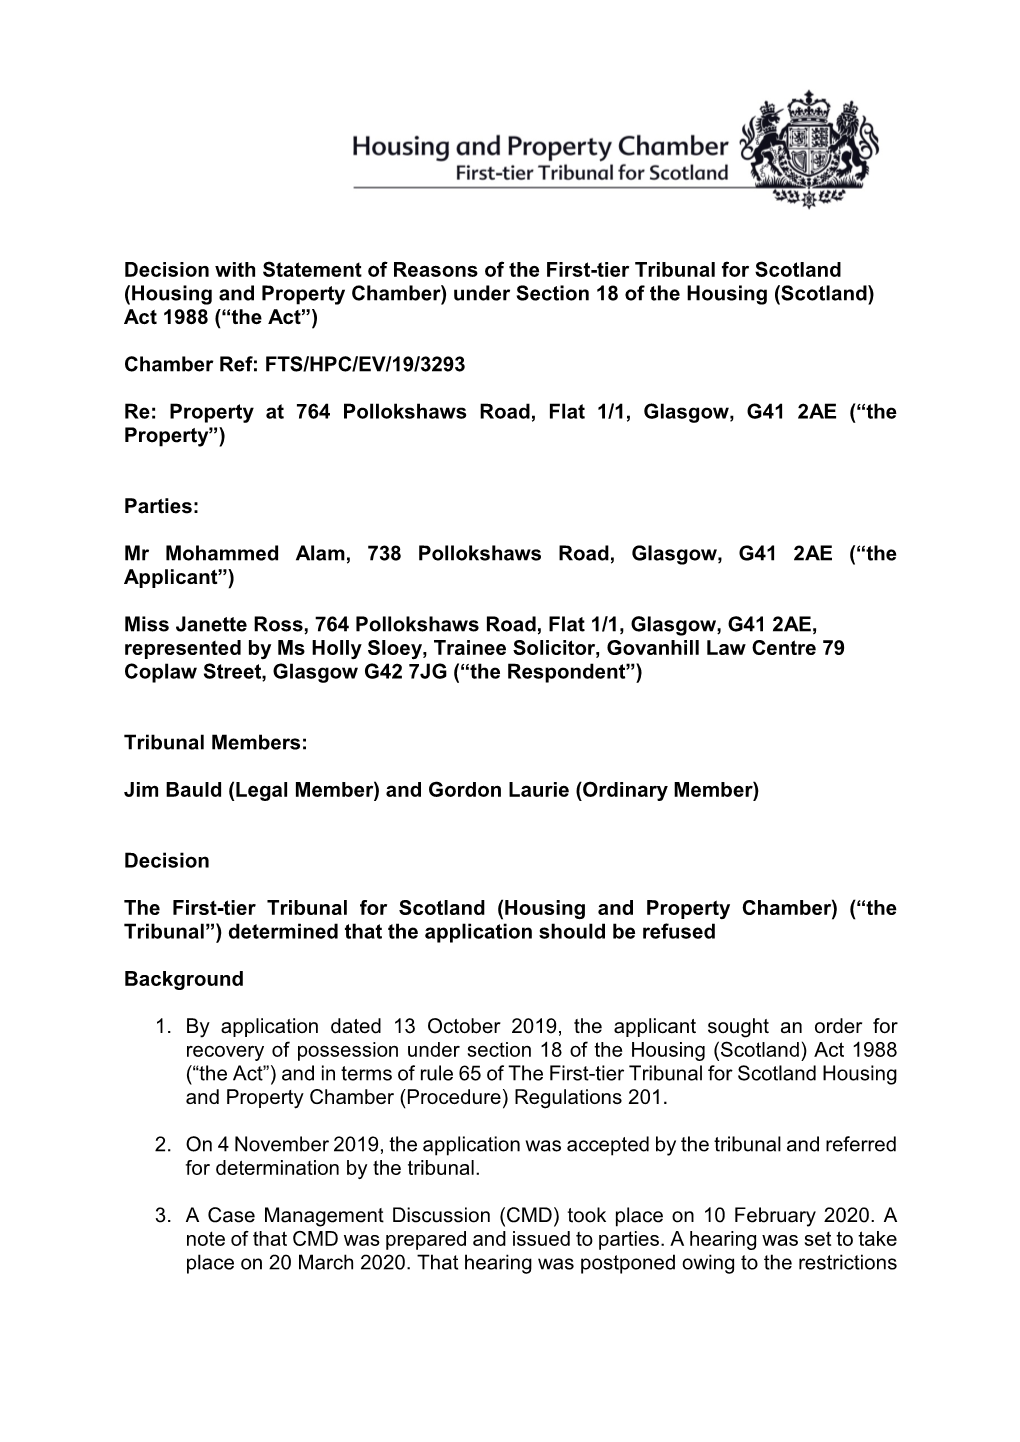 Decision with Statement of Reasons of the First-Tier Tribunal for Scotland (Housing and Property Chamber) Under Section 18 of Th